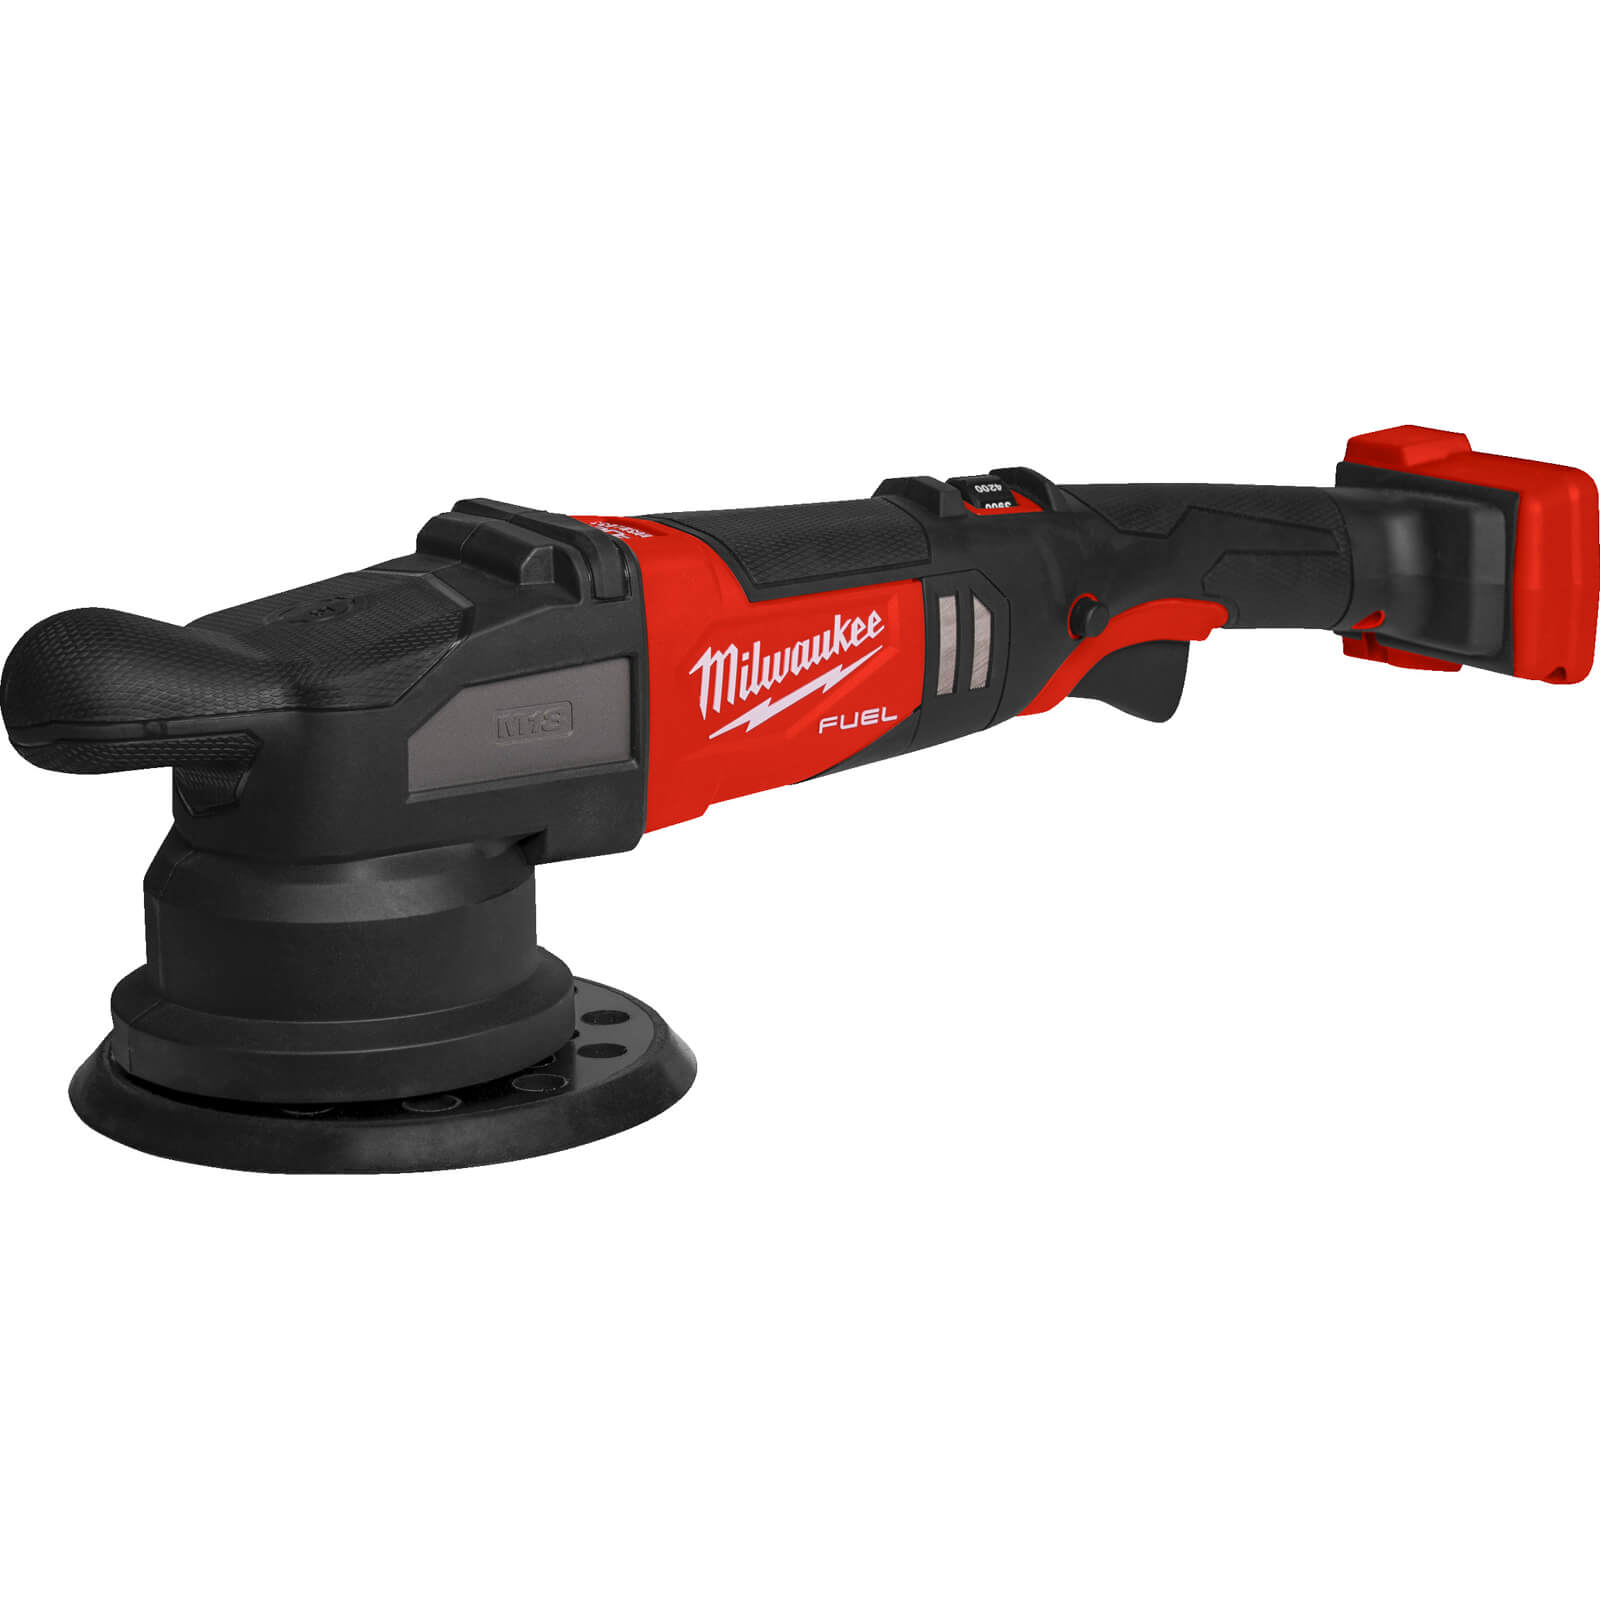 Image of Milwaukee M18 FROP21 Fuel 18v Cordless Brushless Random Orbit Polisher 150mm No Batteries No Charger Case